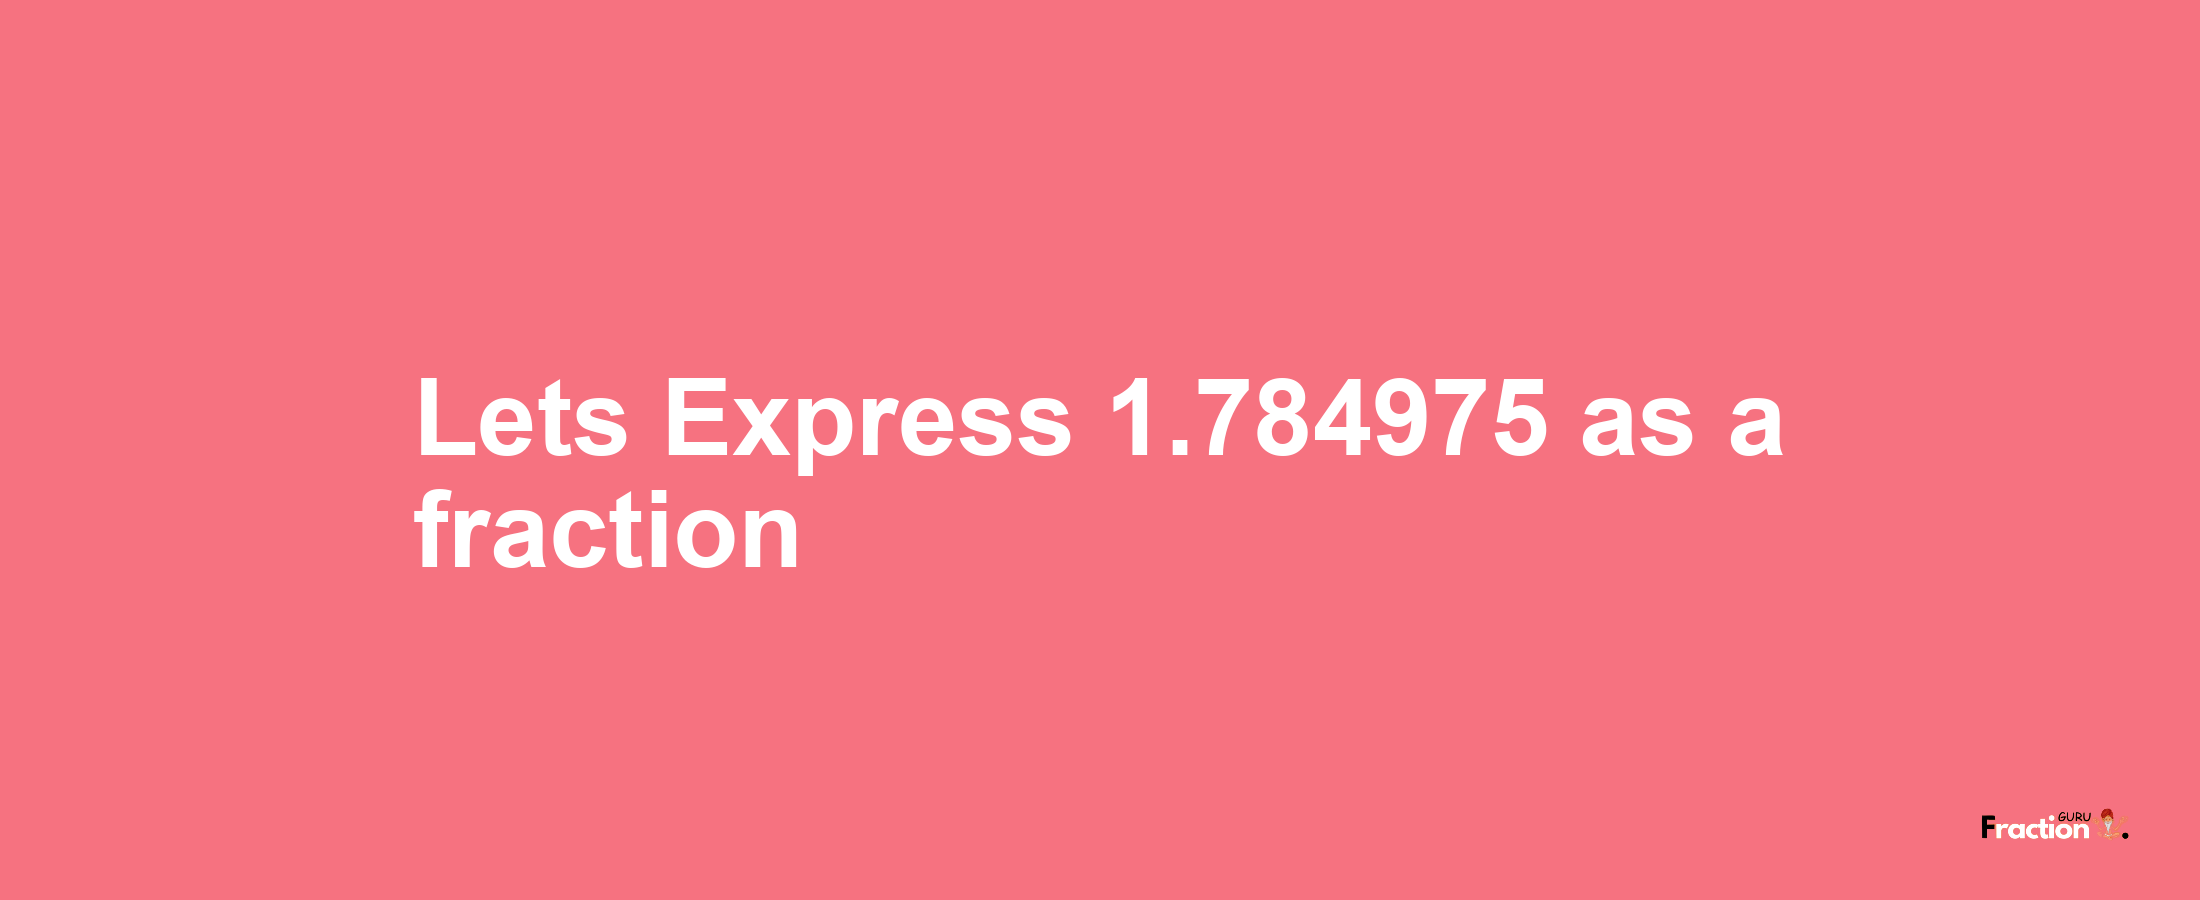 Lets Express 1.784975 as afraction